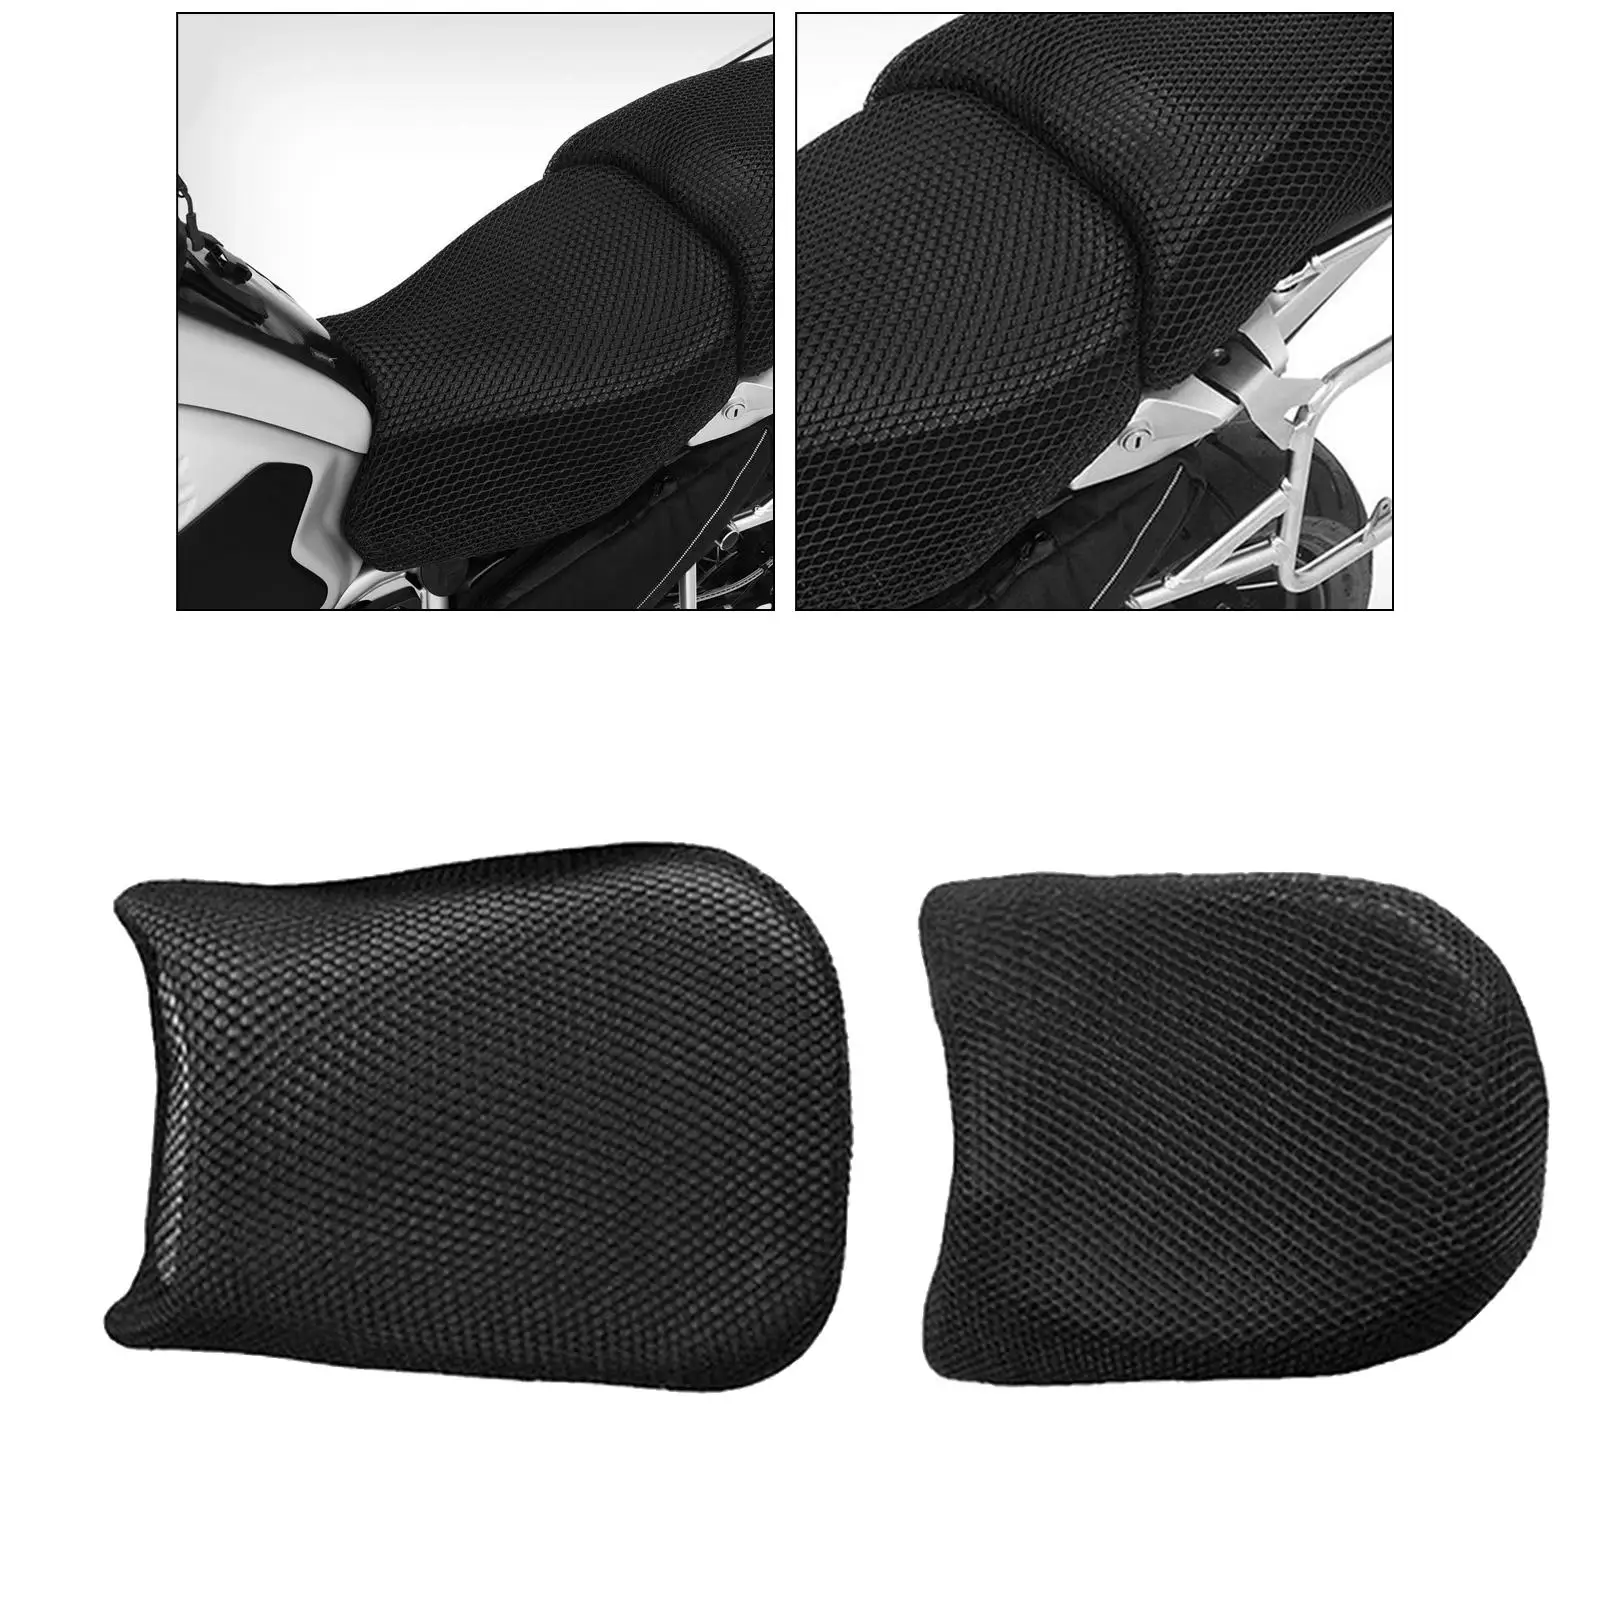 Motorbike Sport Motorcycles Protecting  Seat Pillow Cover Comfortable Pressure  Shock Absorption for   